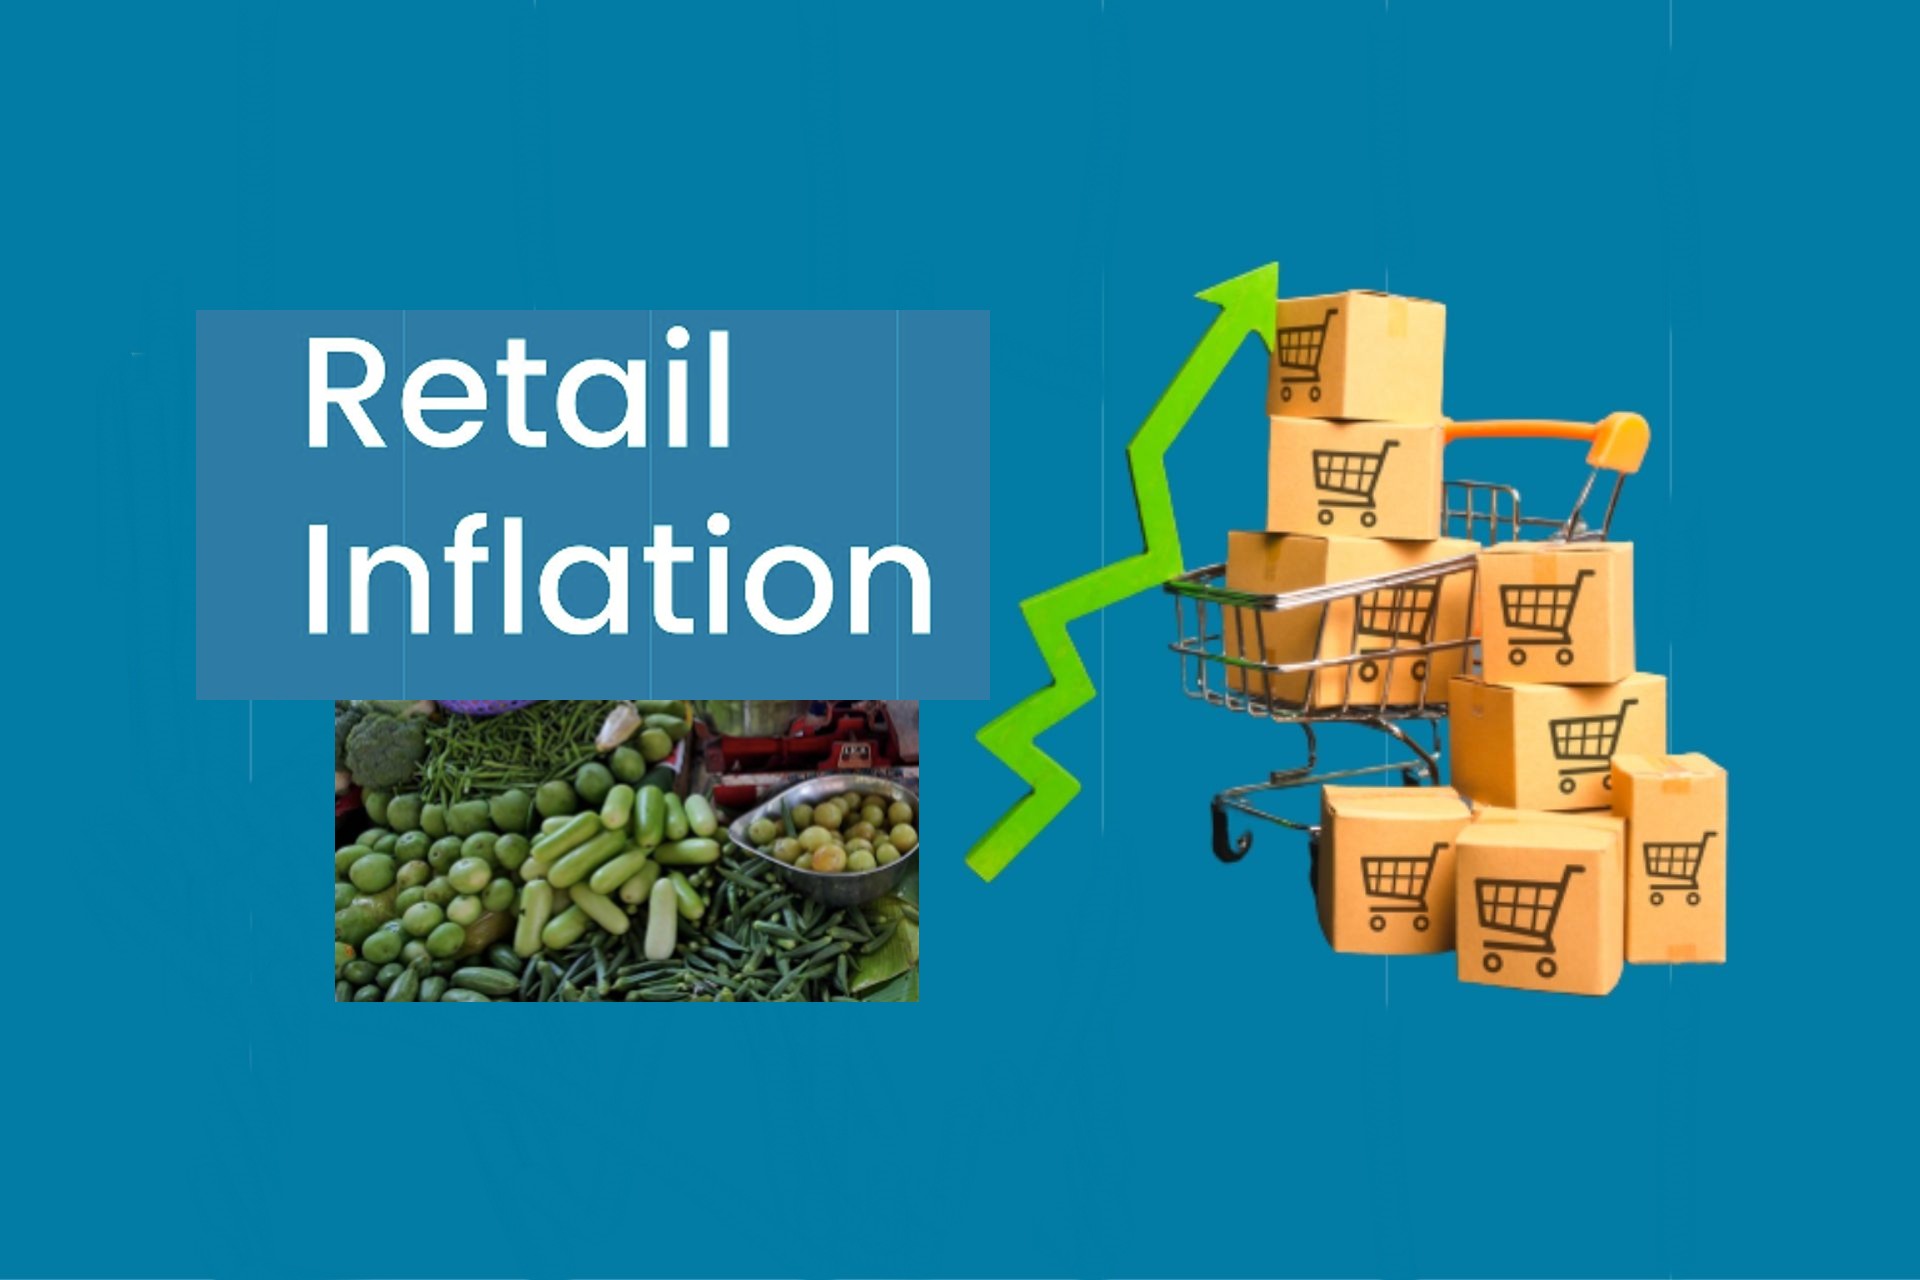 india's retail inflation zooms to 6.01% in january, wpi inflation eases to 12.96% - the nfa post